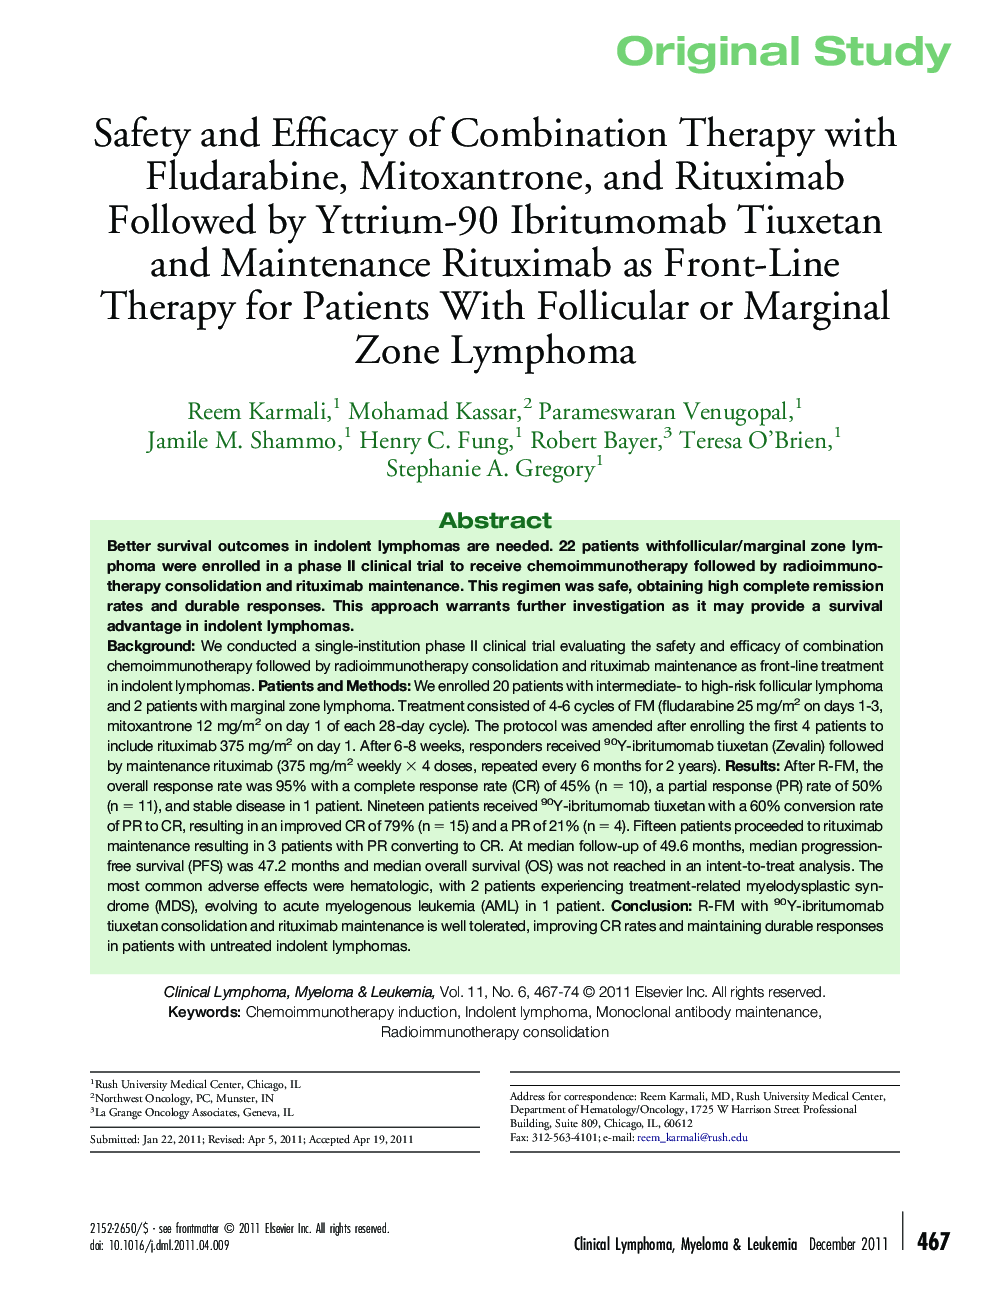 Safety and Efficacy of Combination Therapy with Fludarabine, Mitoxantrone, and Rituximab Followed by Yttrium-90 Ibritumomab Tiuxetan and Maintenance Rituximab as Front-Line Therapy for Patients With Follicular or Marginal Zone Lymphoma